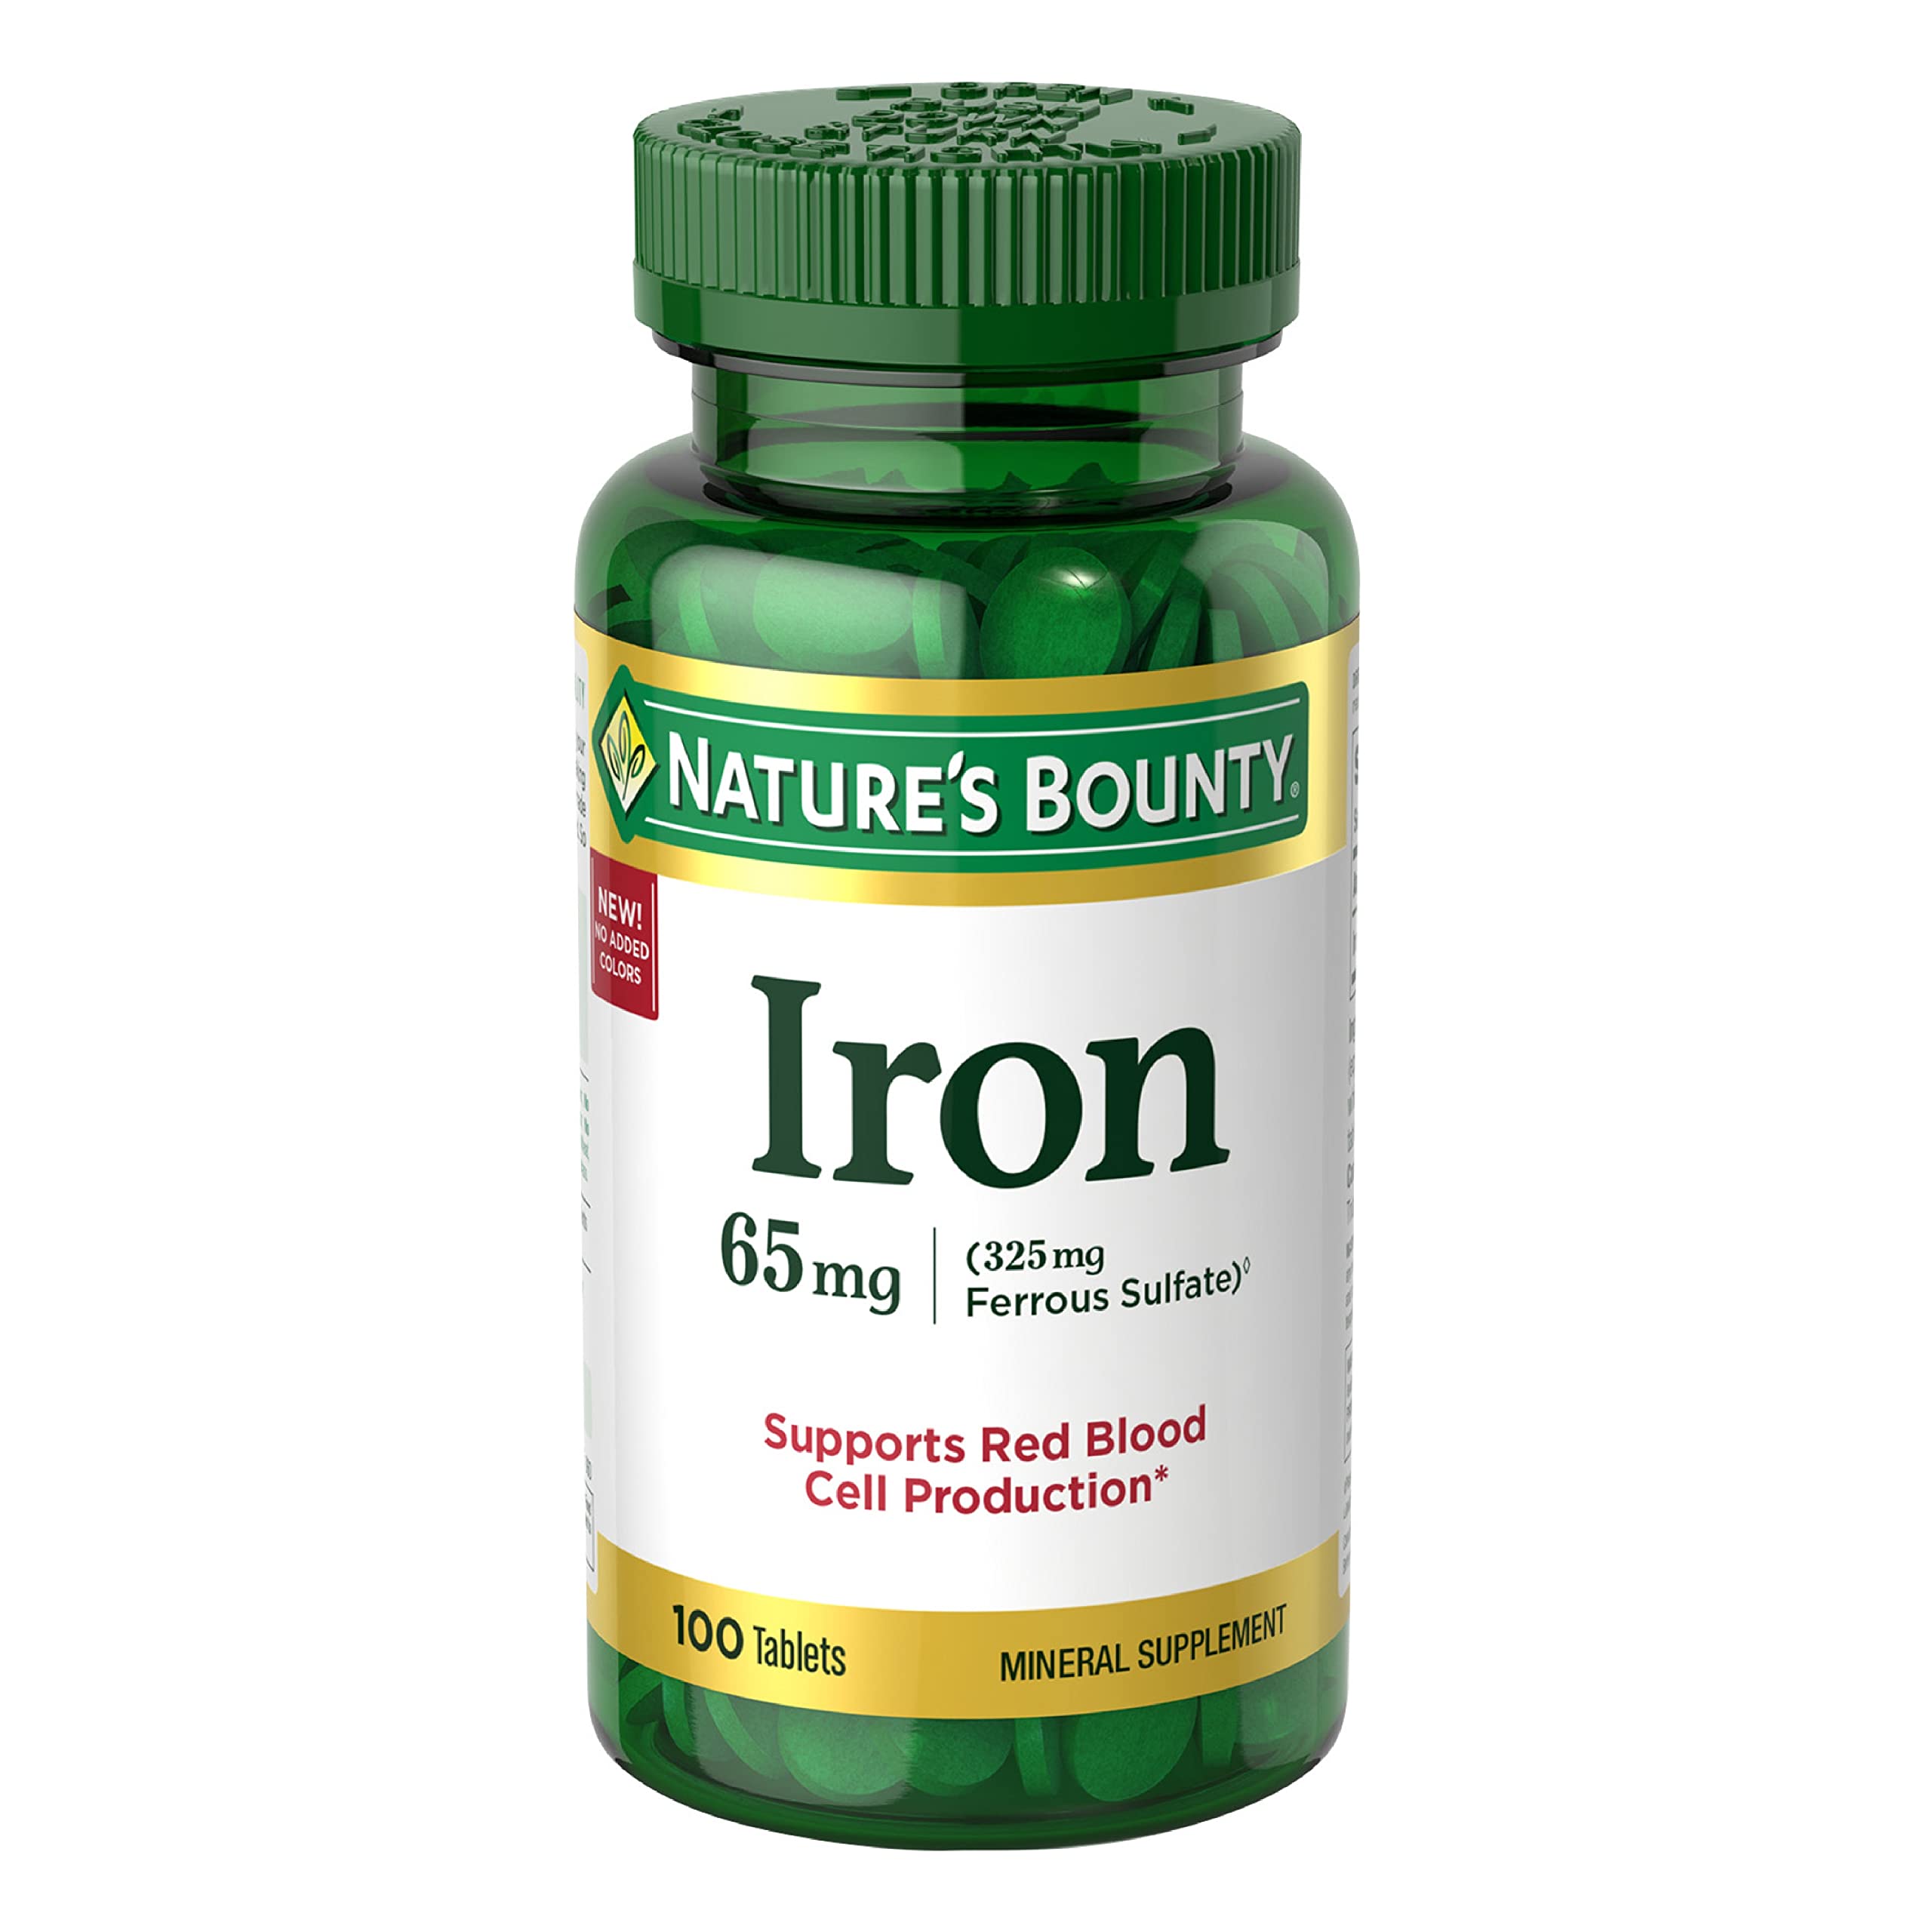 Nature’s Bounty Iron 65mg, 325 mg Ferrous Sulfate, Cellular Energy Support, Promotes Normal Red Blood Cell Production, 100 Tablets